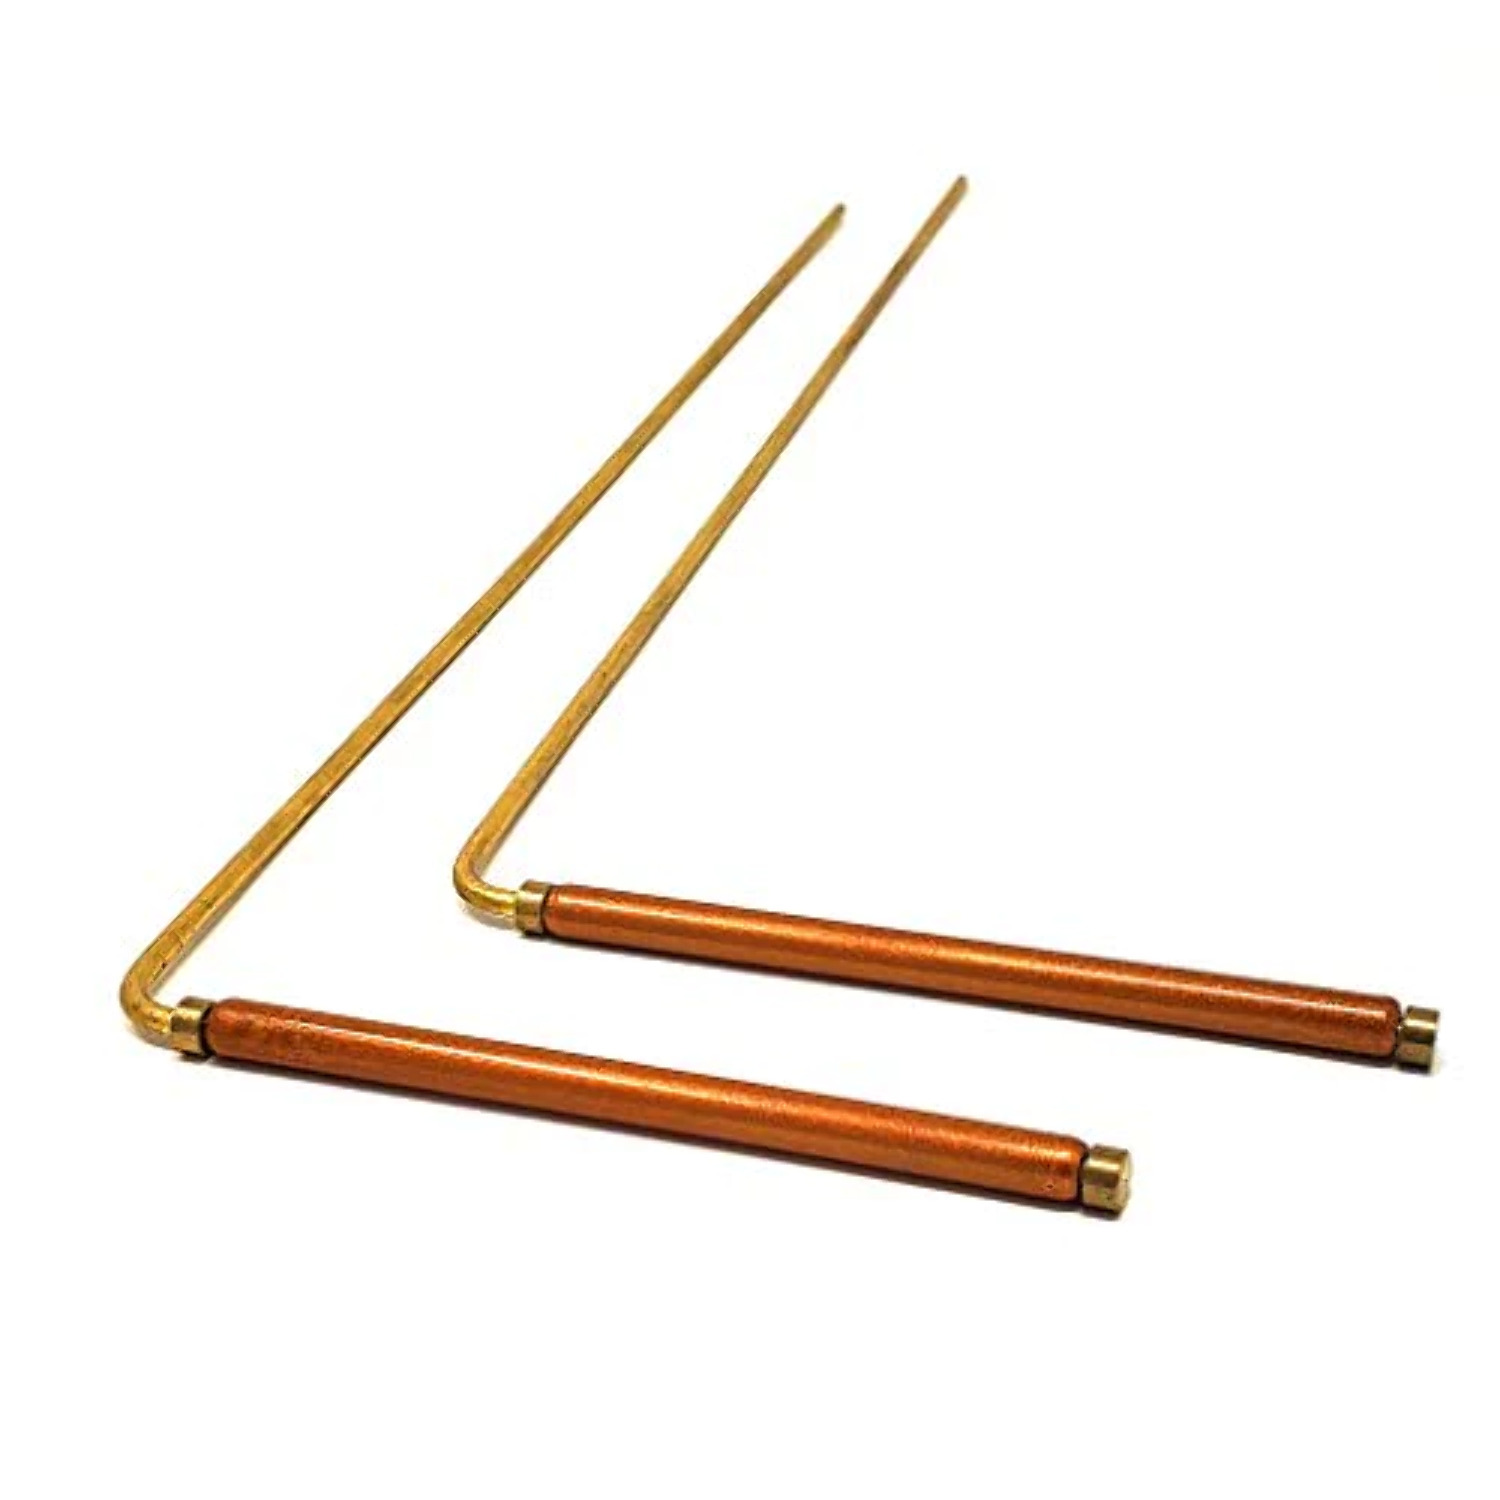 MyDeal Solid Copper and Brass Dowsing Rods with Smooth Movement for Tracing Spiritual Energy Chi, Ghost Hunting, Water Divining, Finding Gold, Locating Lost Items or Answering Questions! - image 1 of 9